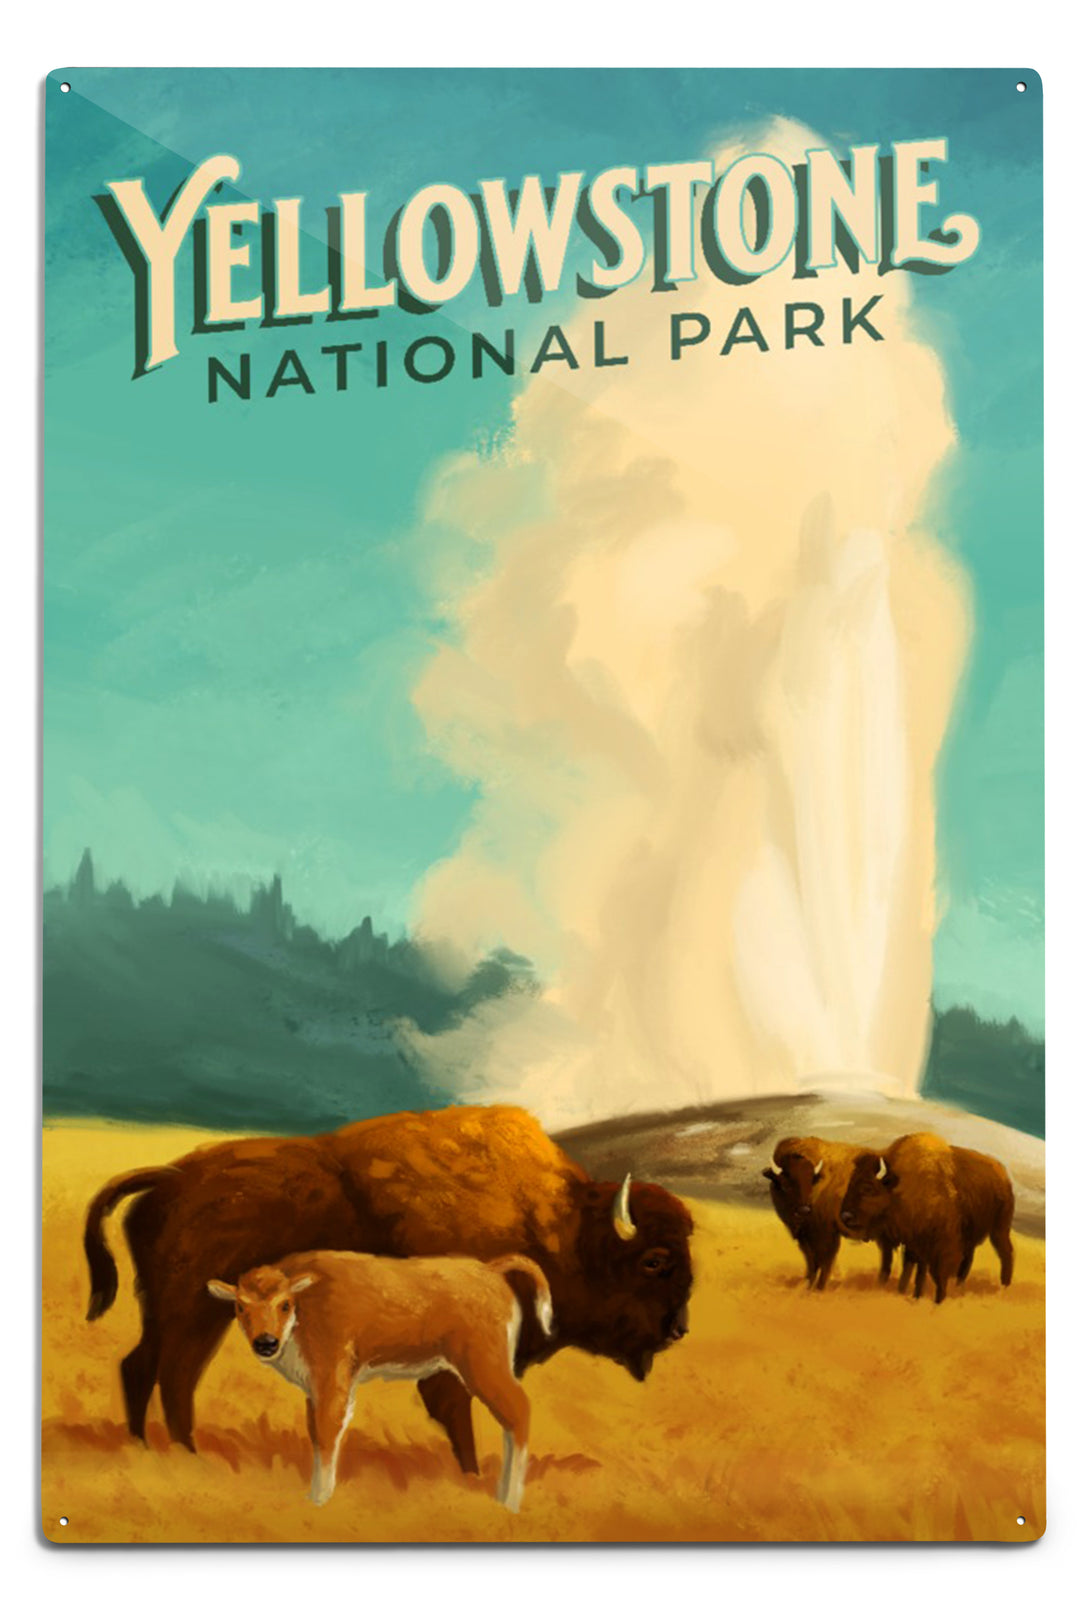 Yellowstone National Park, Old Faithful and Bison, Oil Painting, Metal Signs